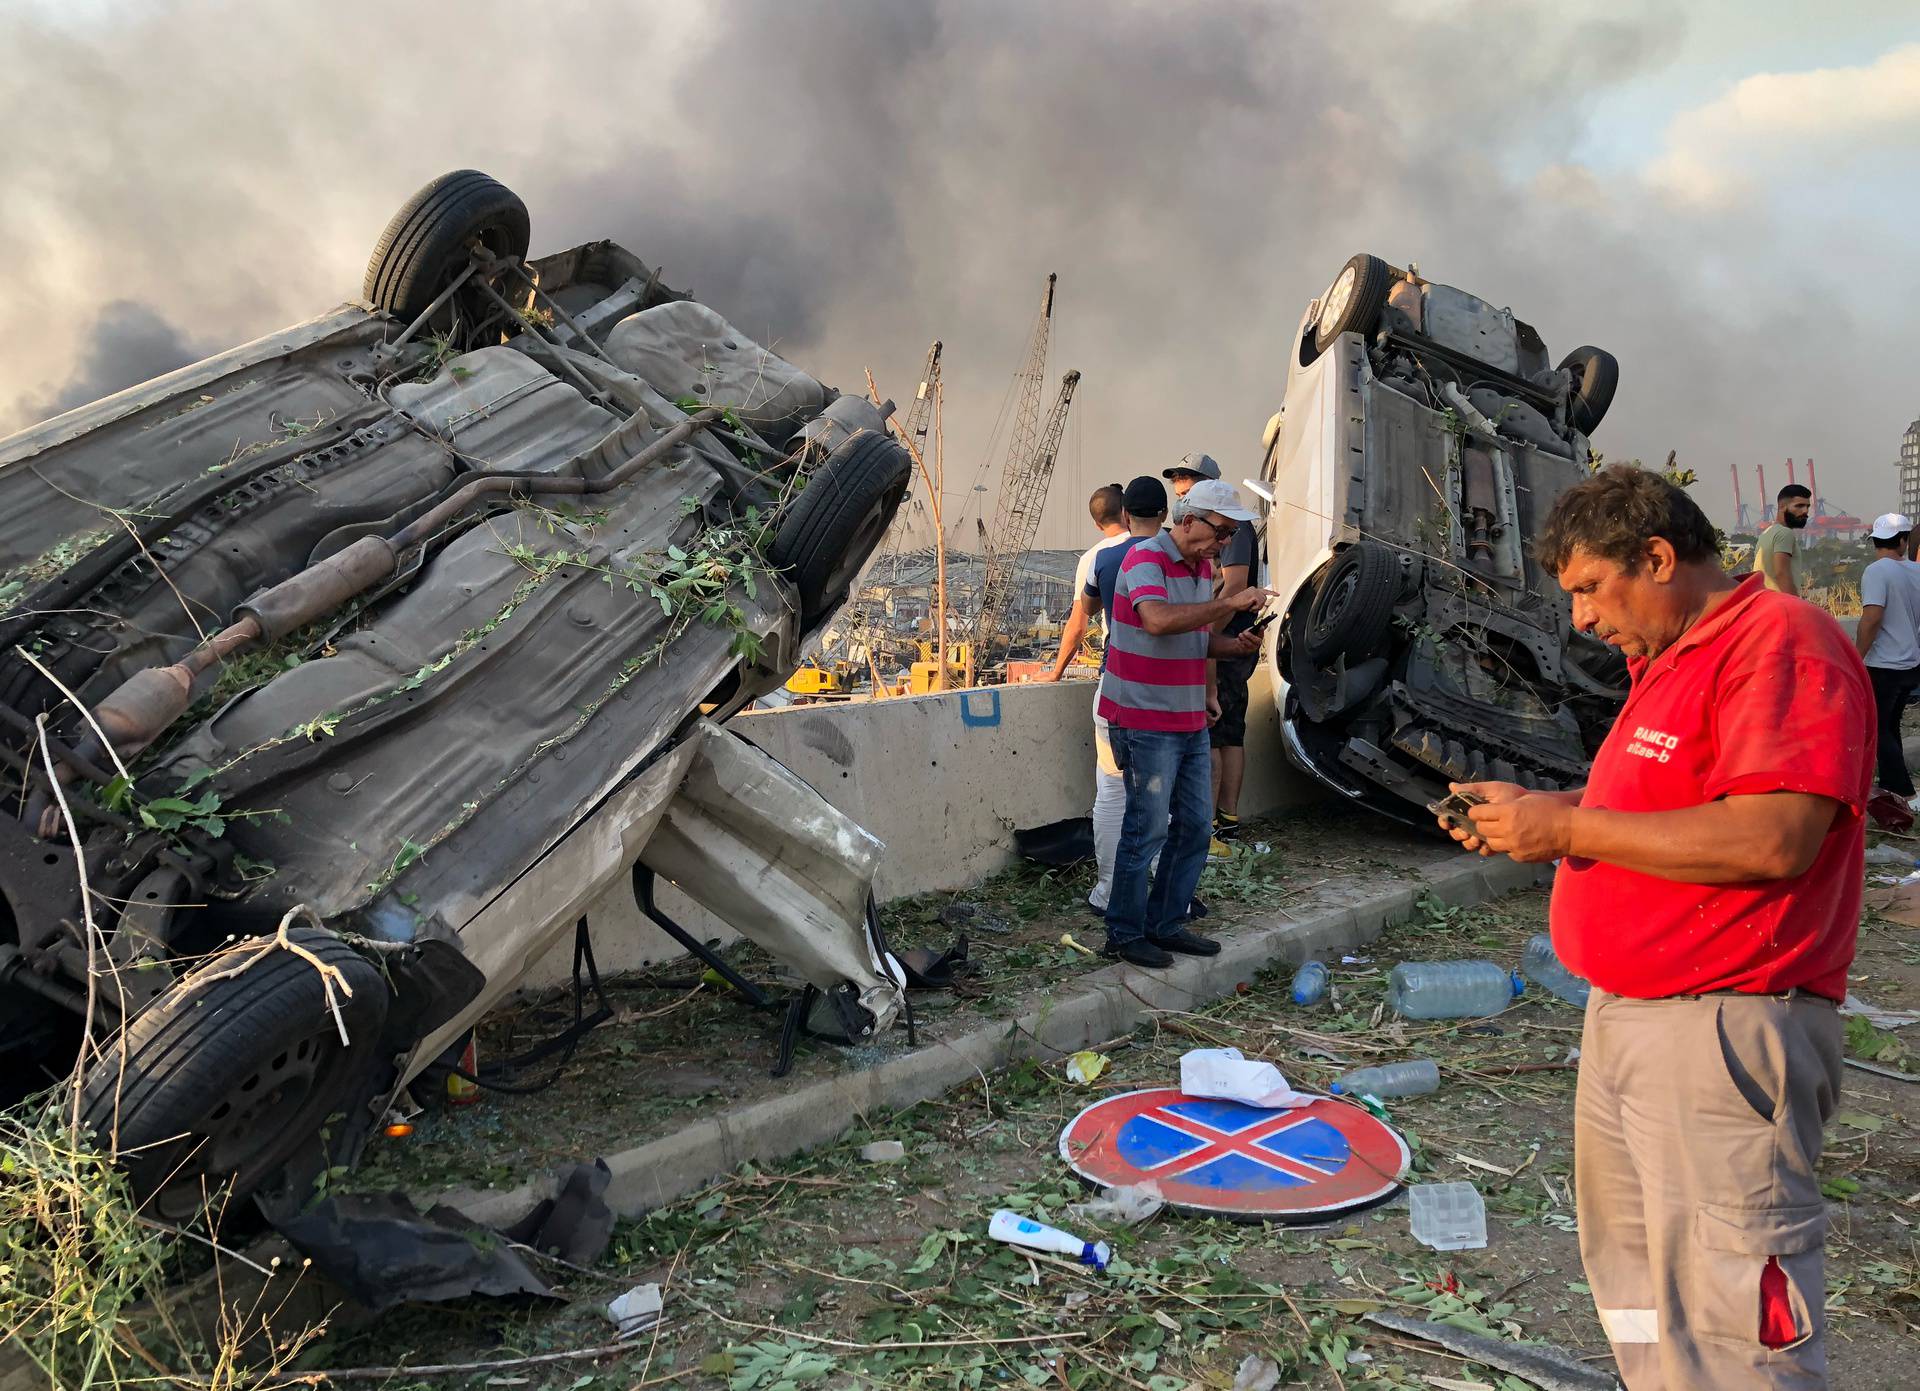 People stand near damaged cars following an explosion in Beirut